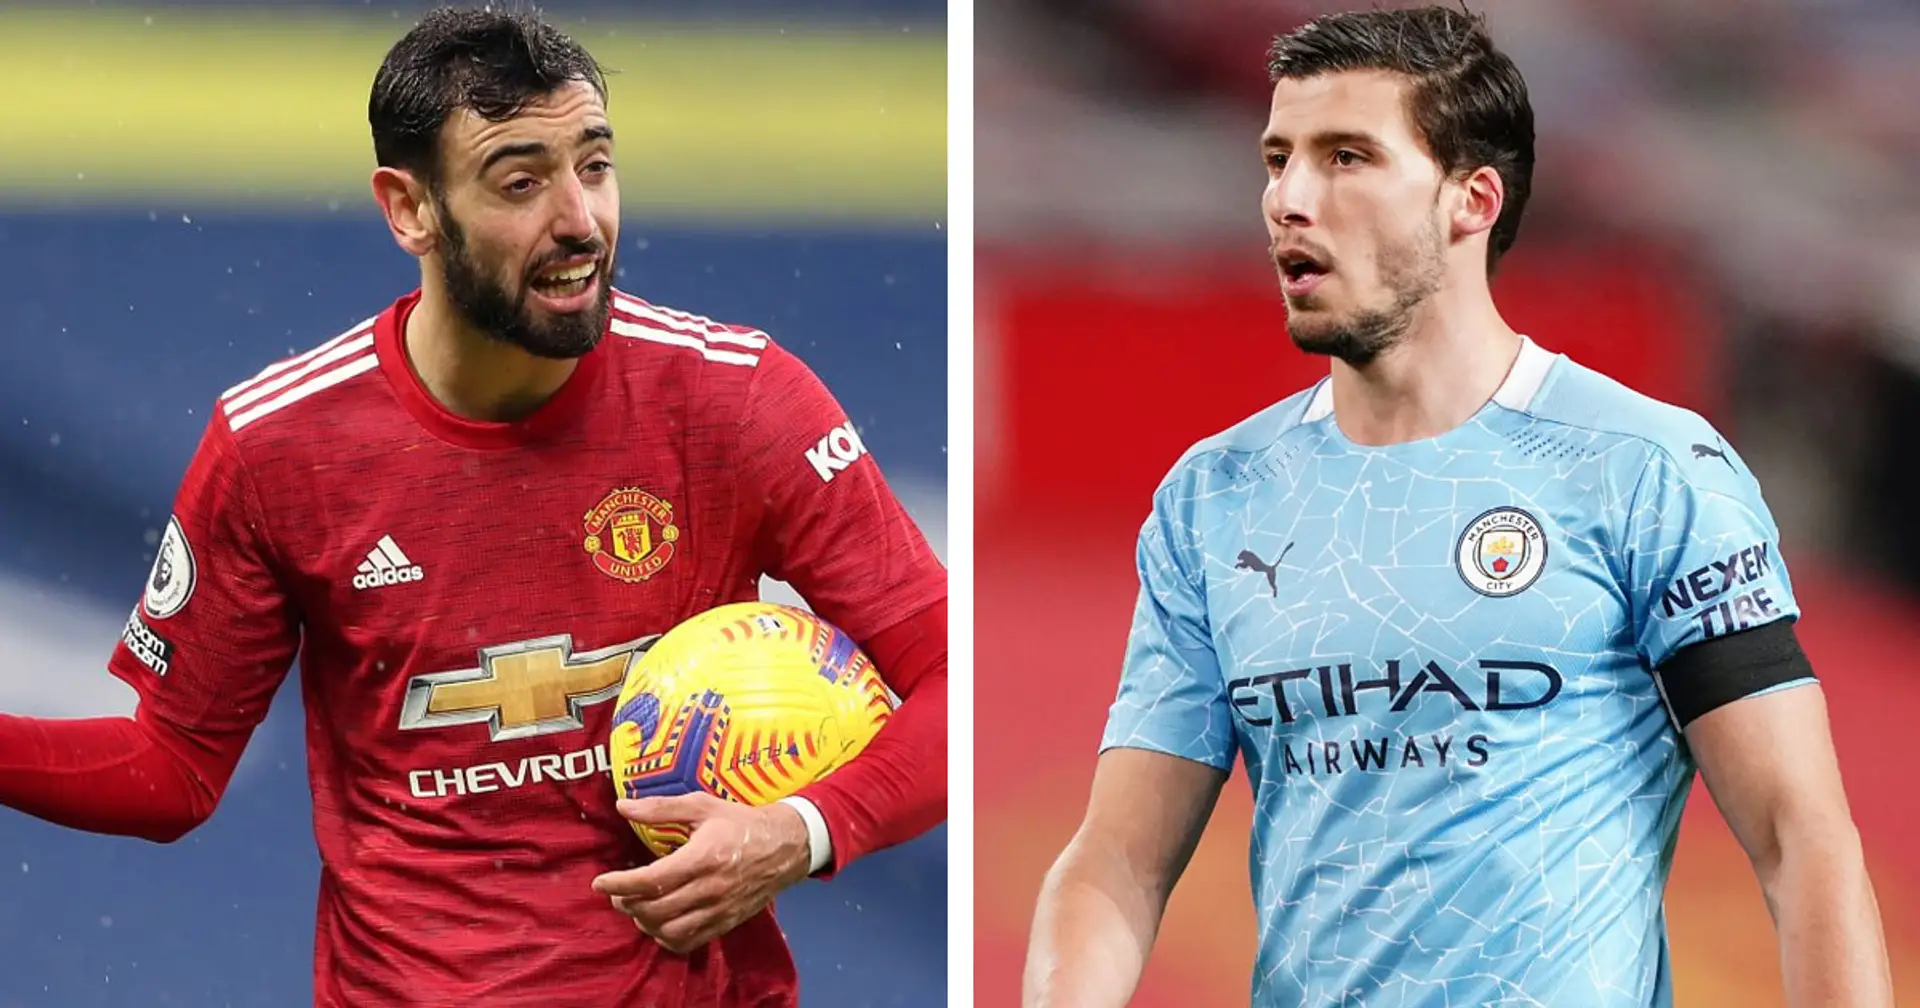 ‘They know on the pitch we are not friends anymore’: Bruno sends warning to Portuguese Man City stars ahead of derby